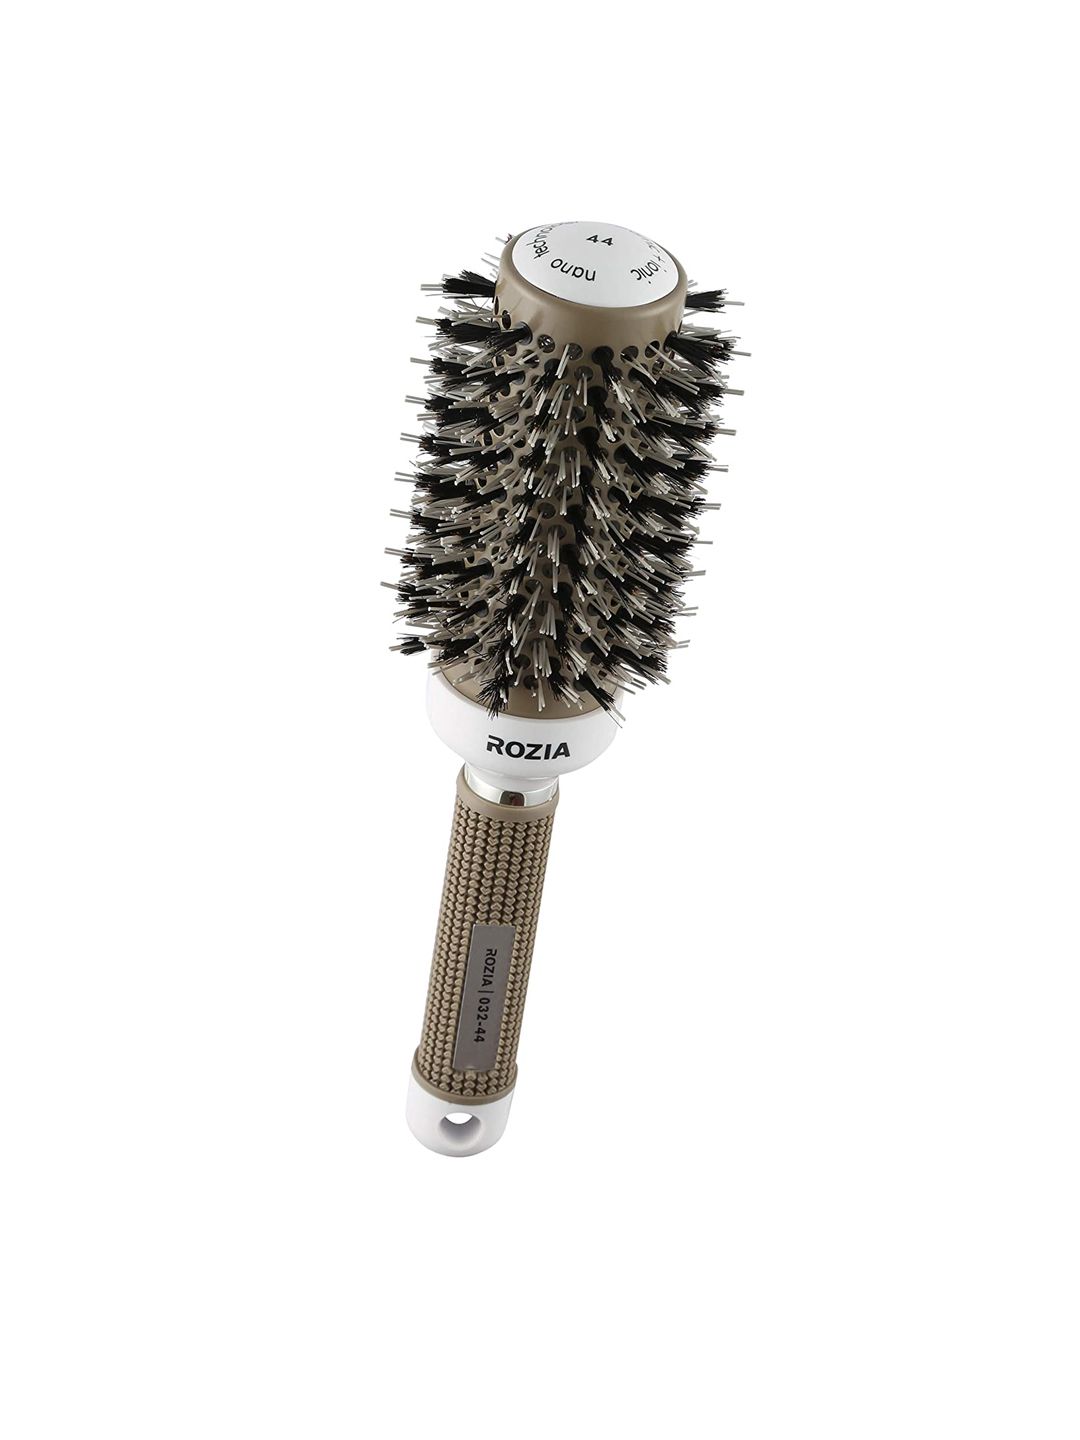 Rozia Grey Round Hair Brush For Blow Drying with Natural Boar Bristle Price  in India, Full Specifications & Offers 